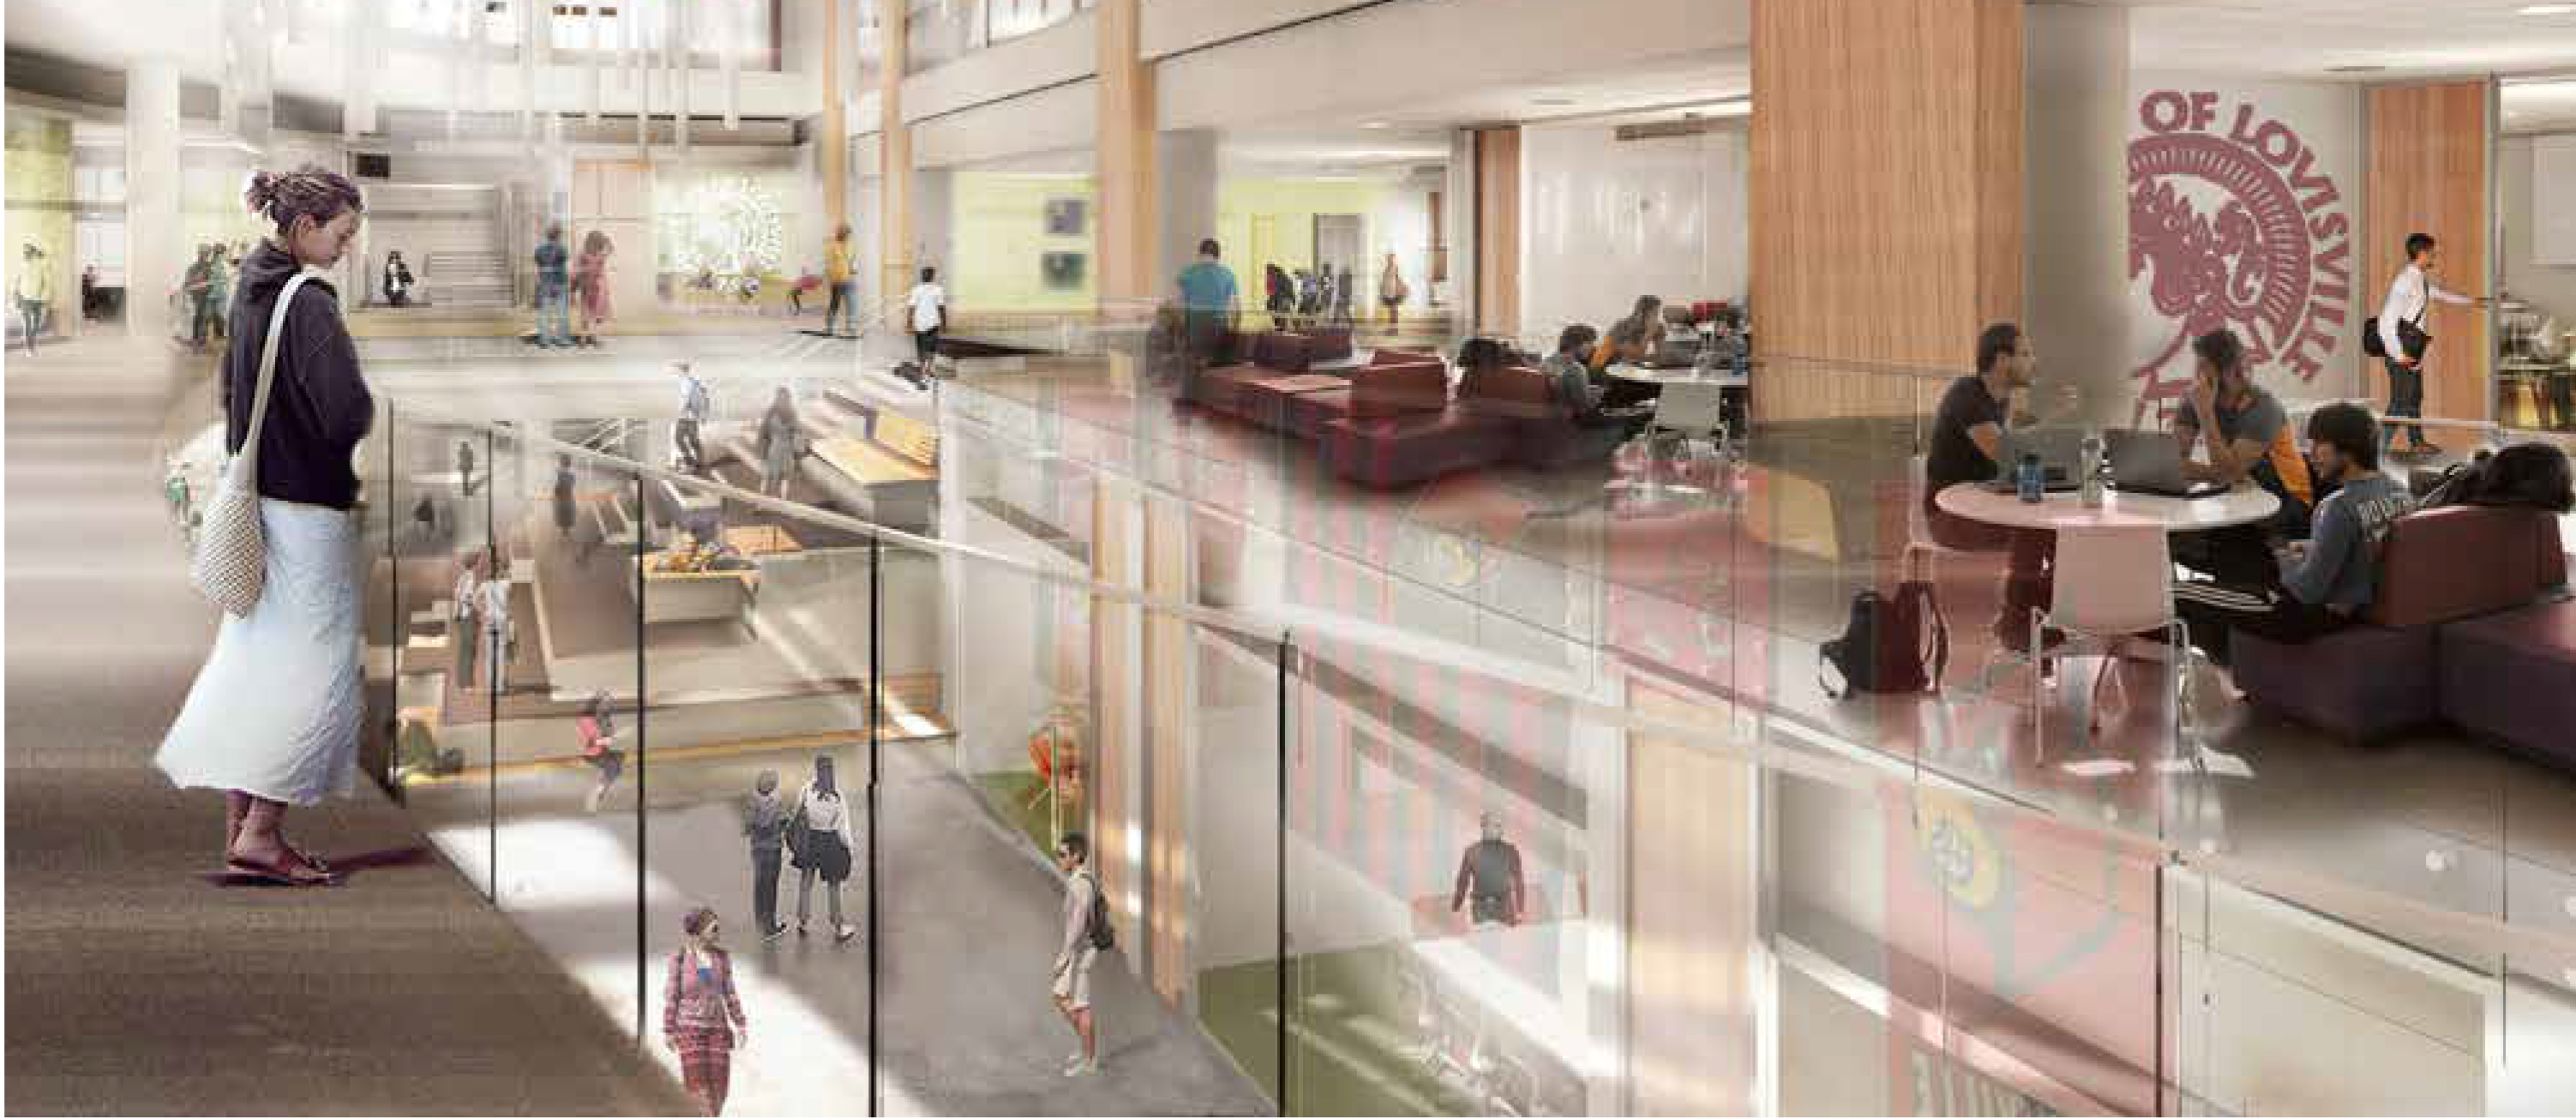 The new Academic Building will include a student success center that offers academic support, advising and career services all in one spot.